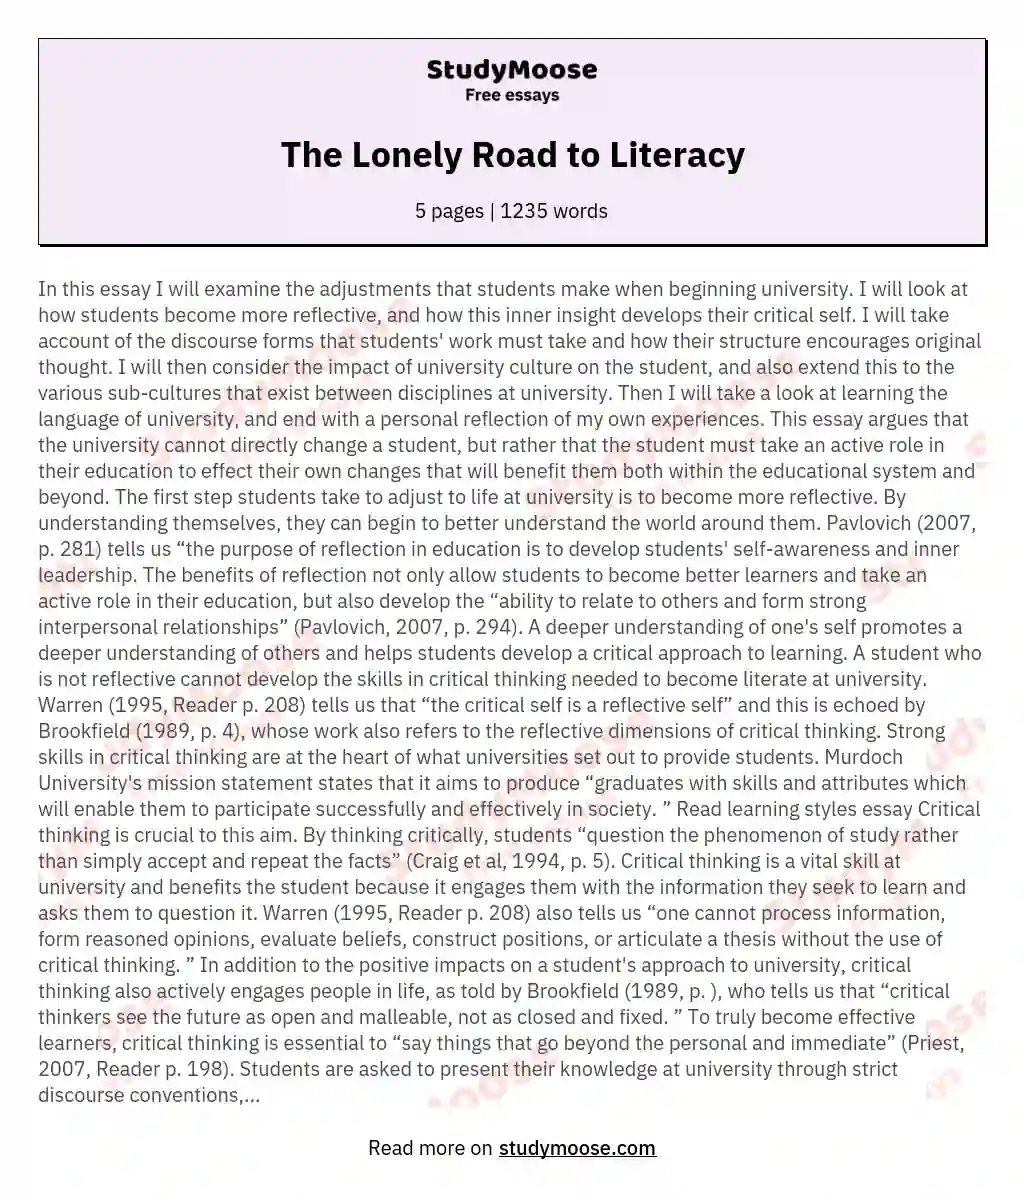 The Lonely Road to Literacy essay